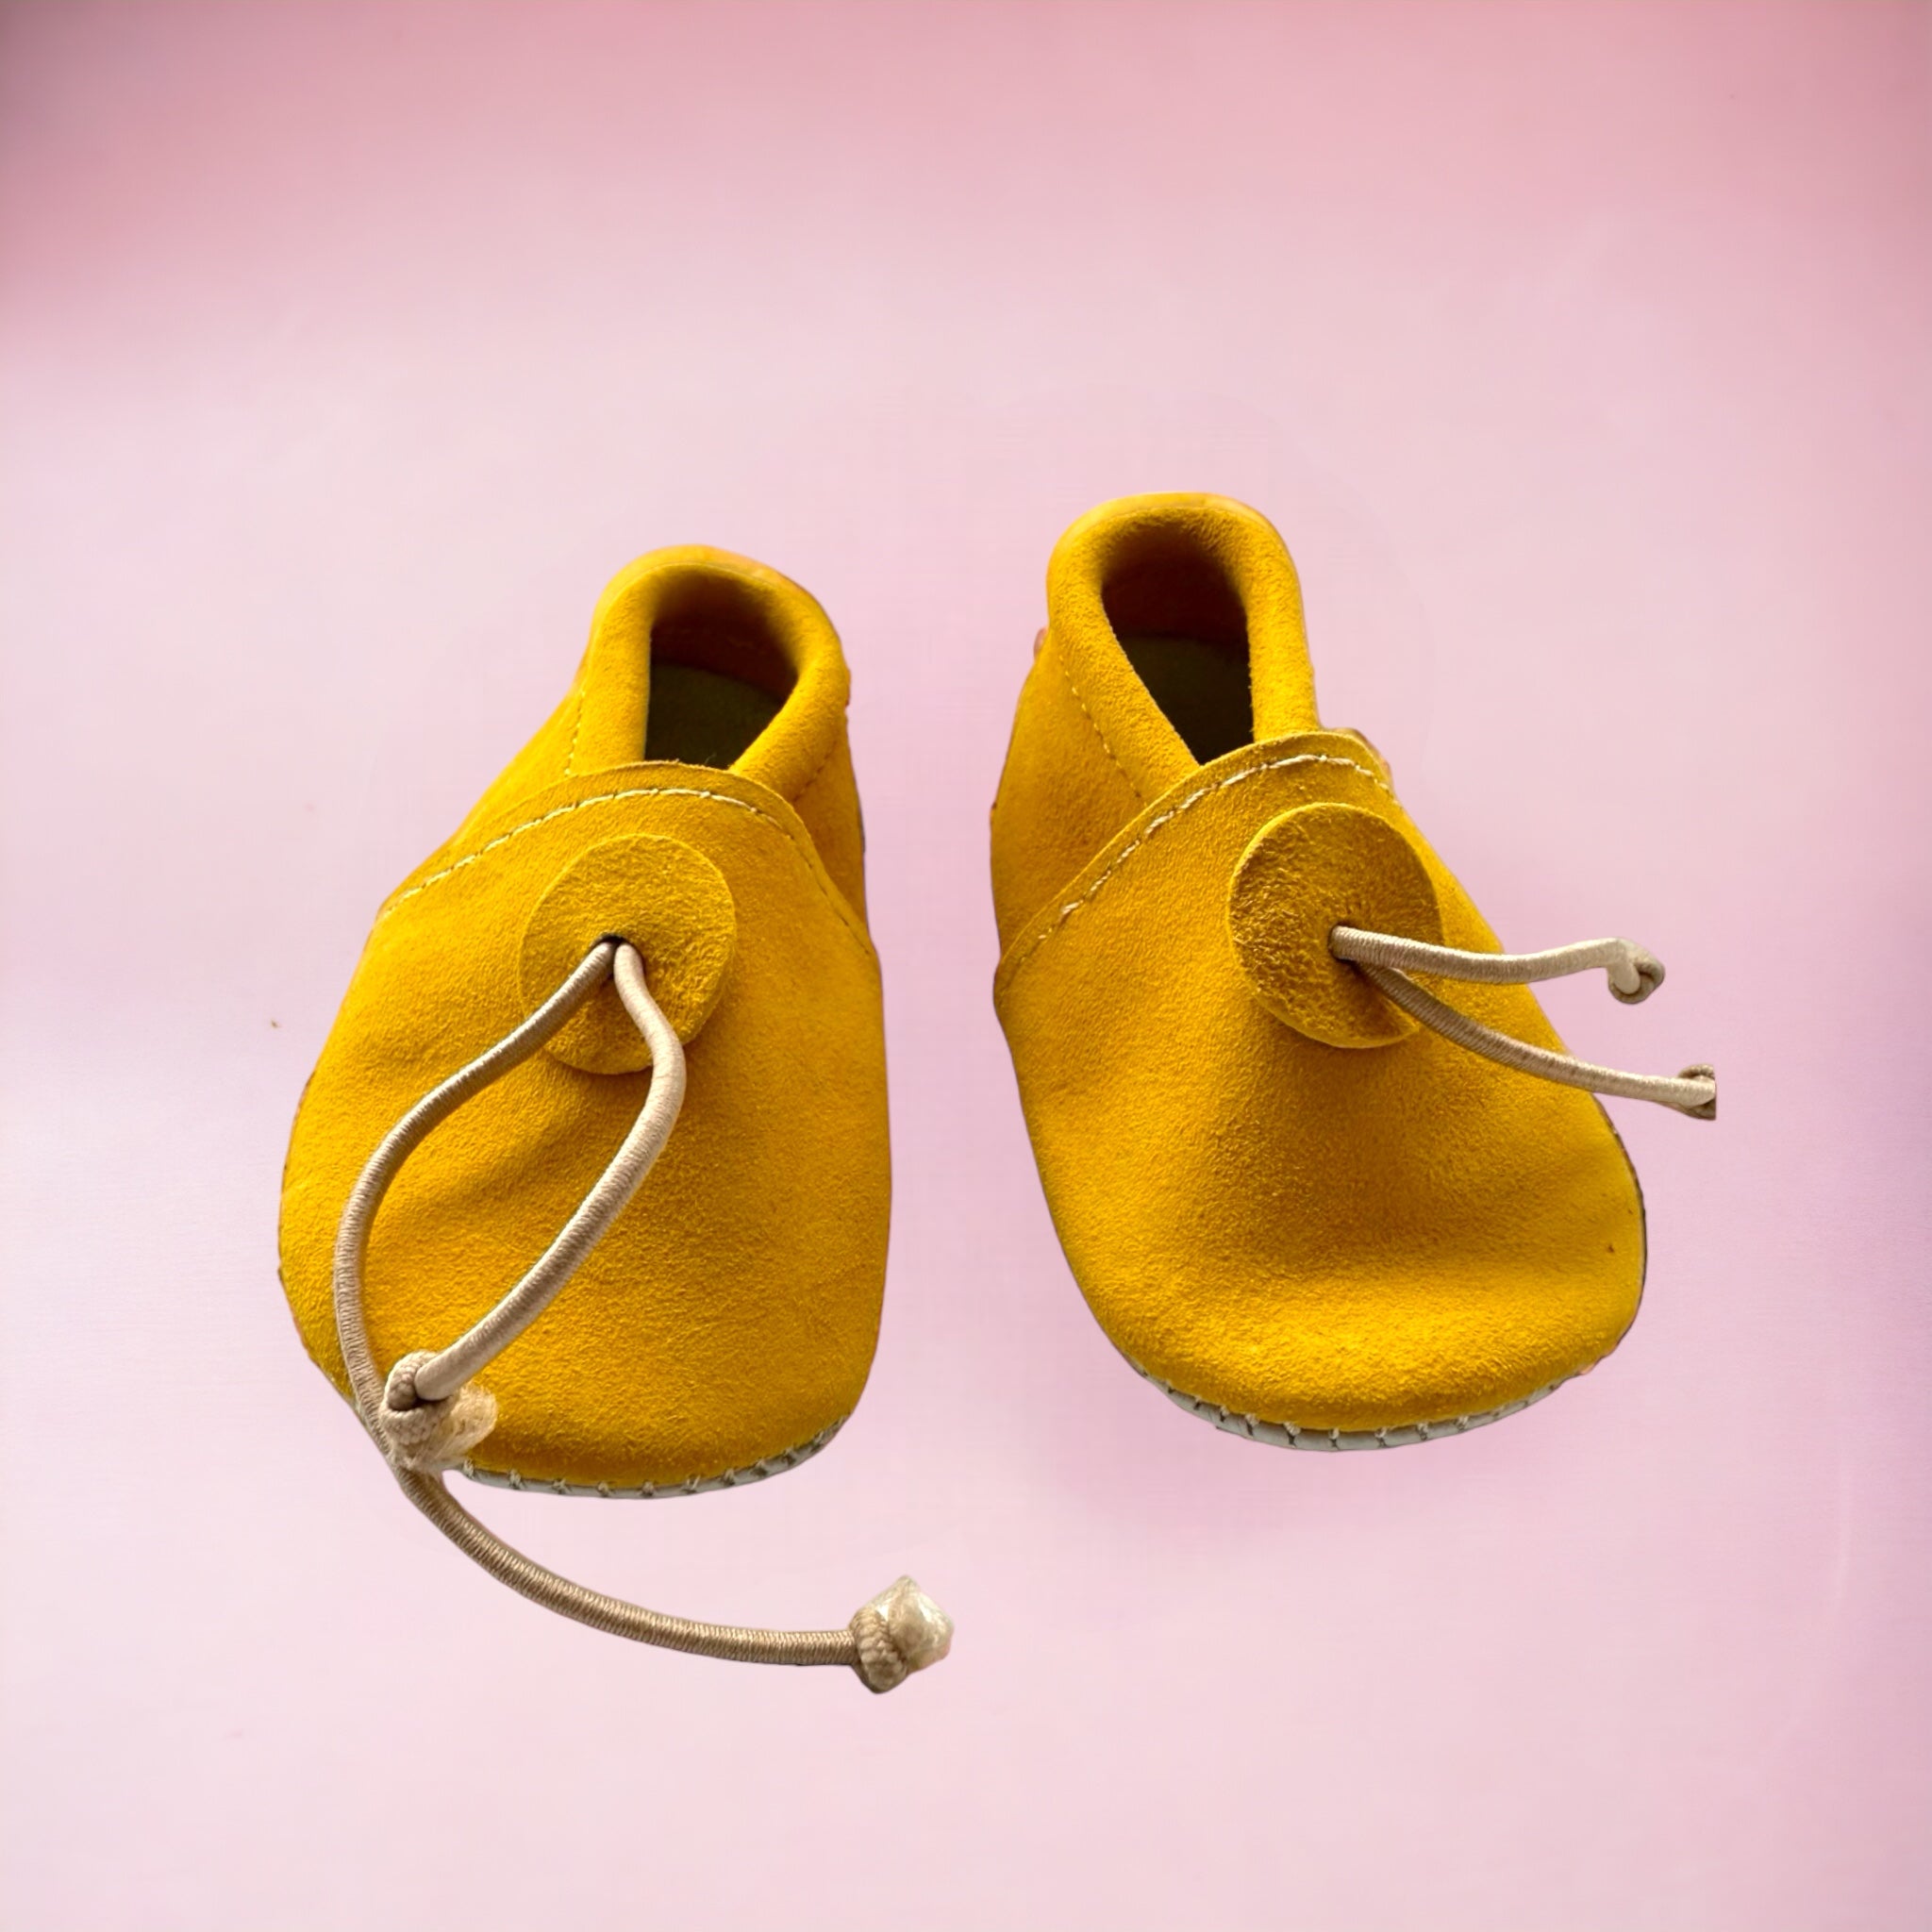 NEW: Mini leather baby shoes in three versions